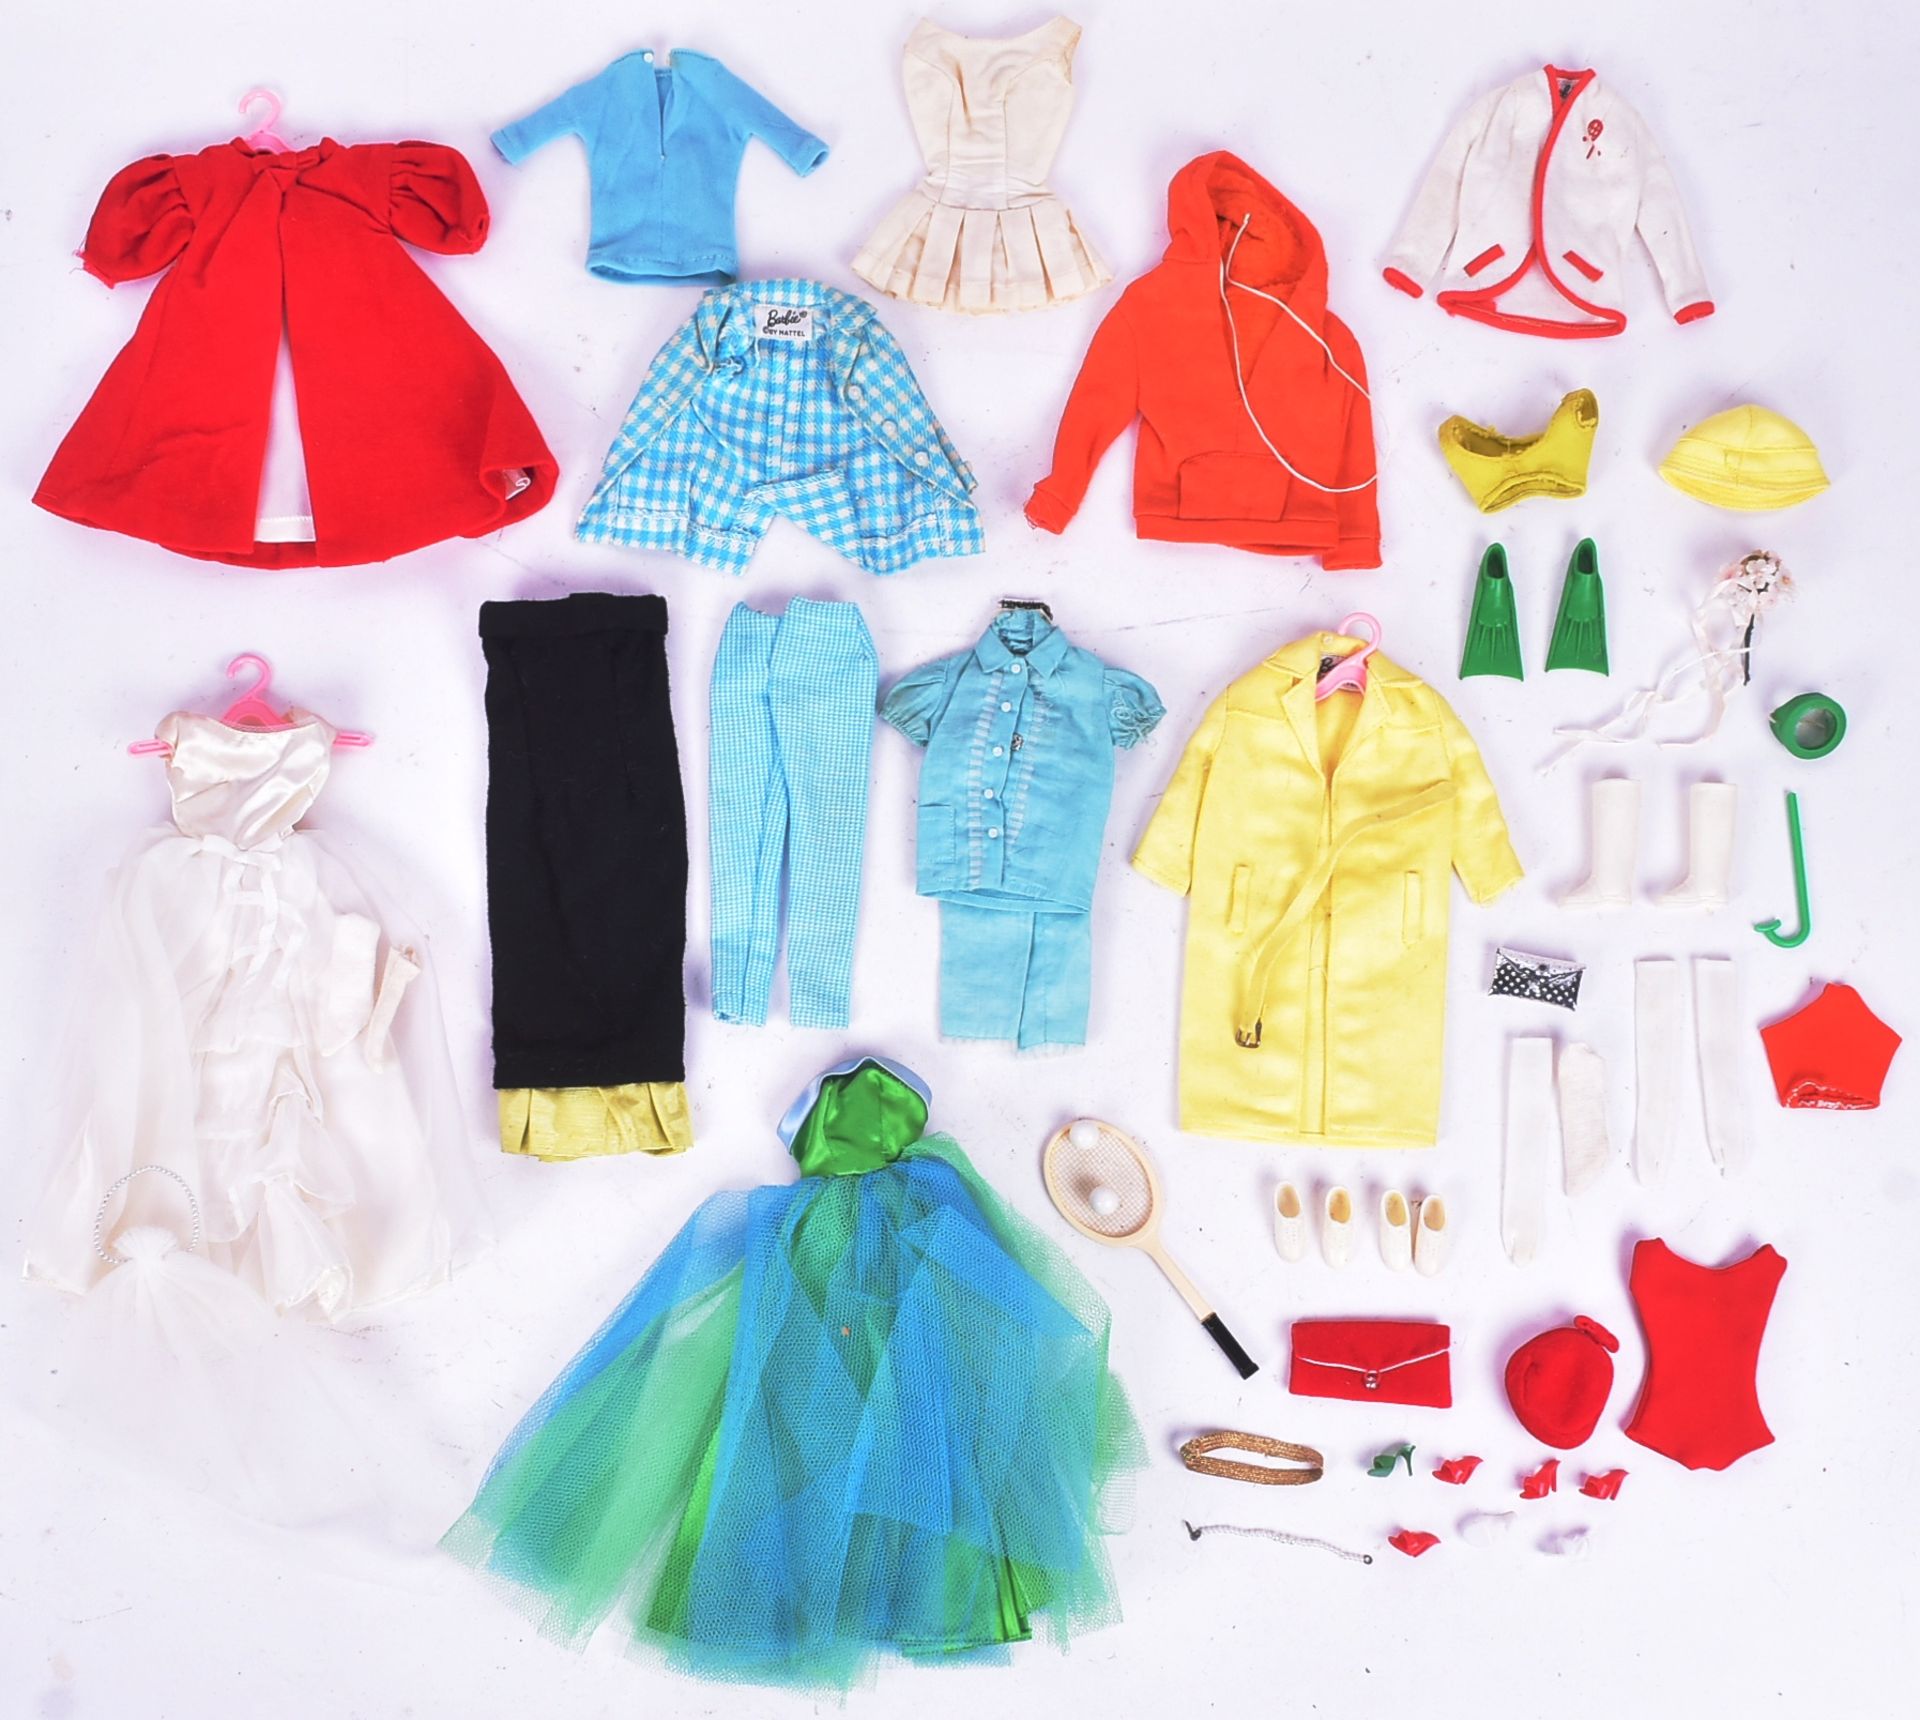 BARBIE - VINTAGE 1960S BARBIE DOLL WITH CLOTHING & ACCESSORIES - Image 4 of 6